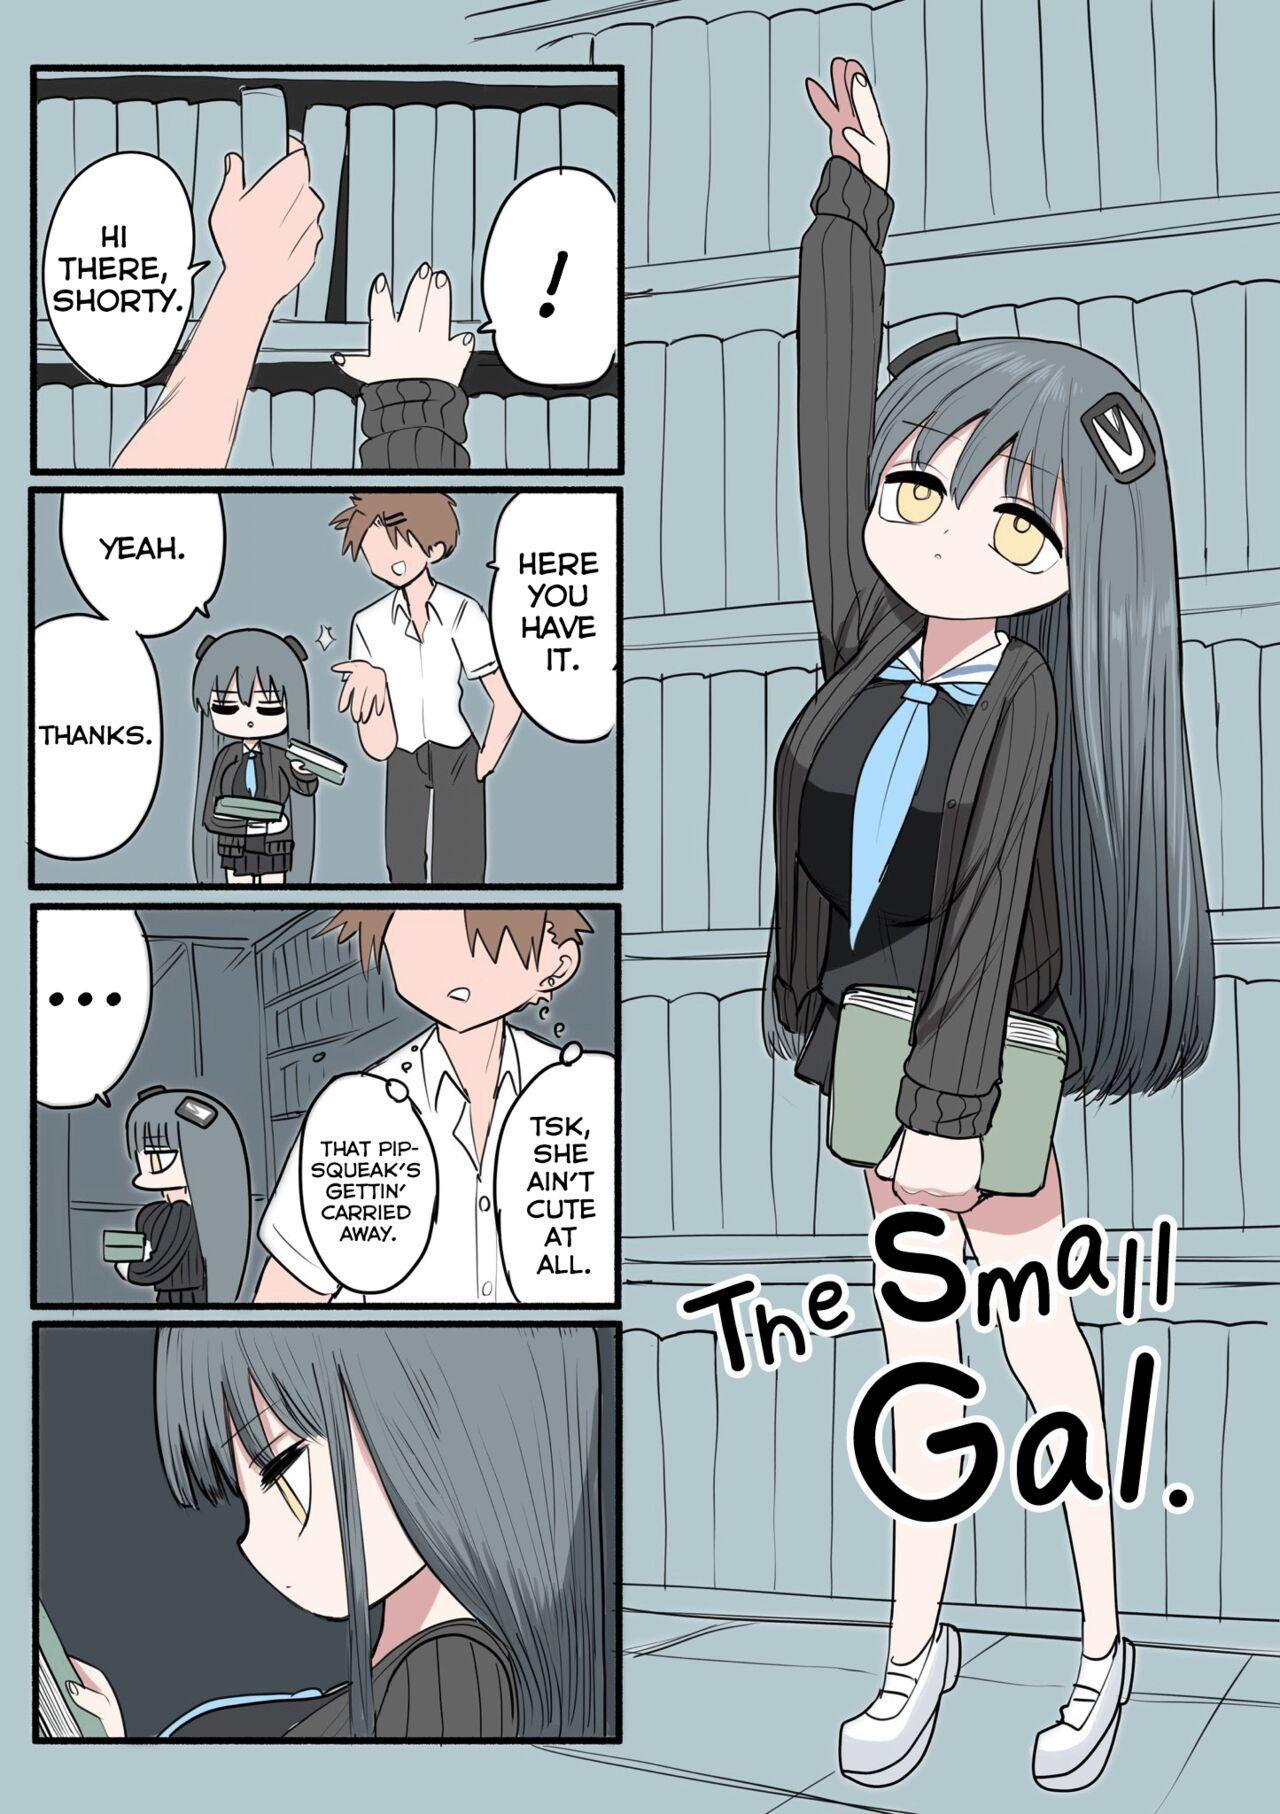 Chiisai Gal | The Small Gal 62